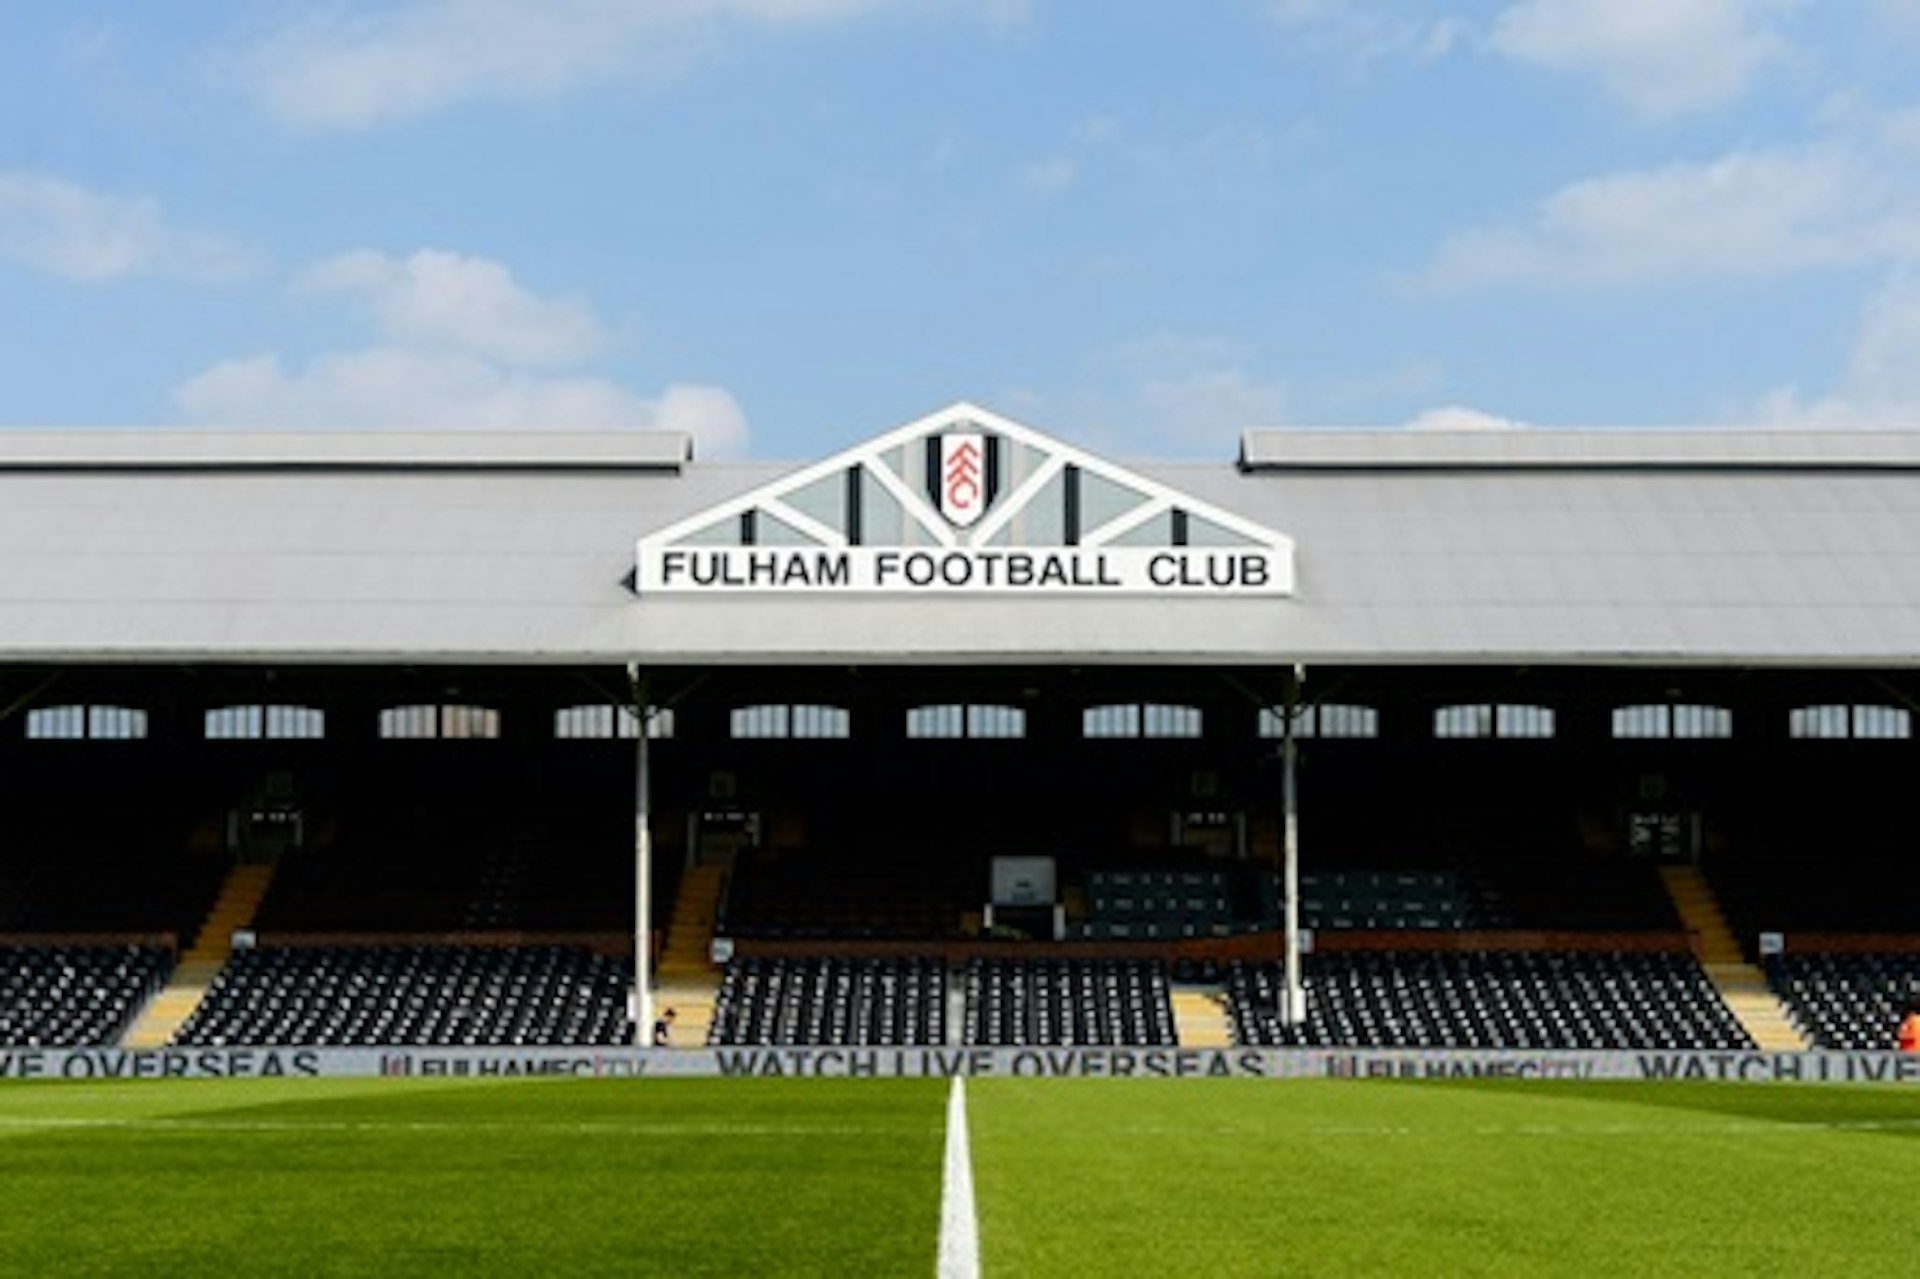 Fulham FC Stadium Tour for One Adult and One Child